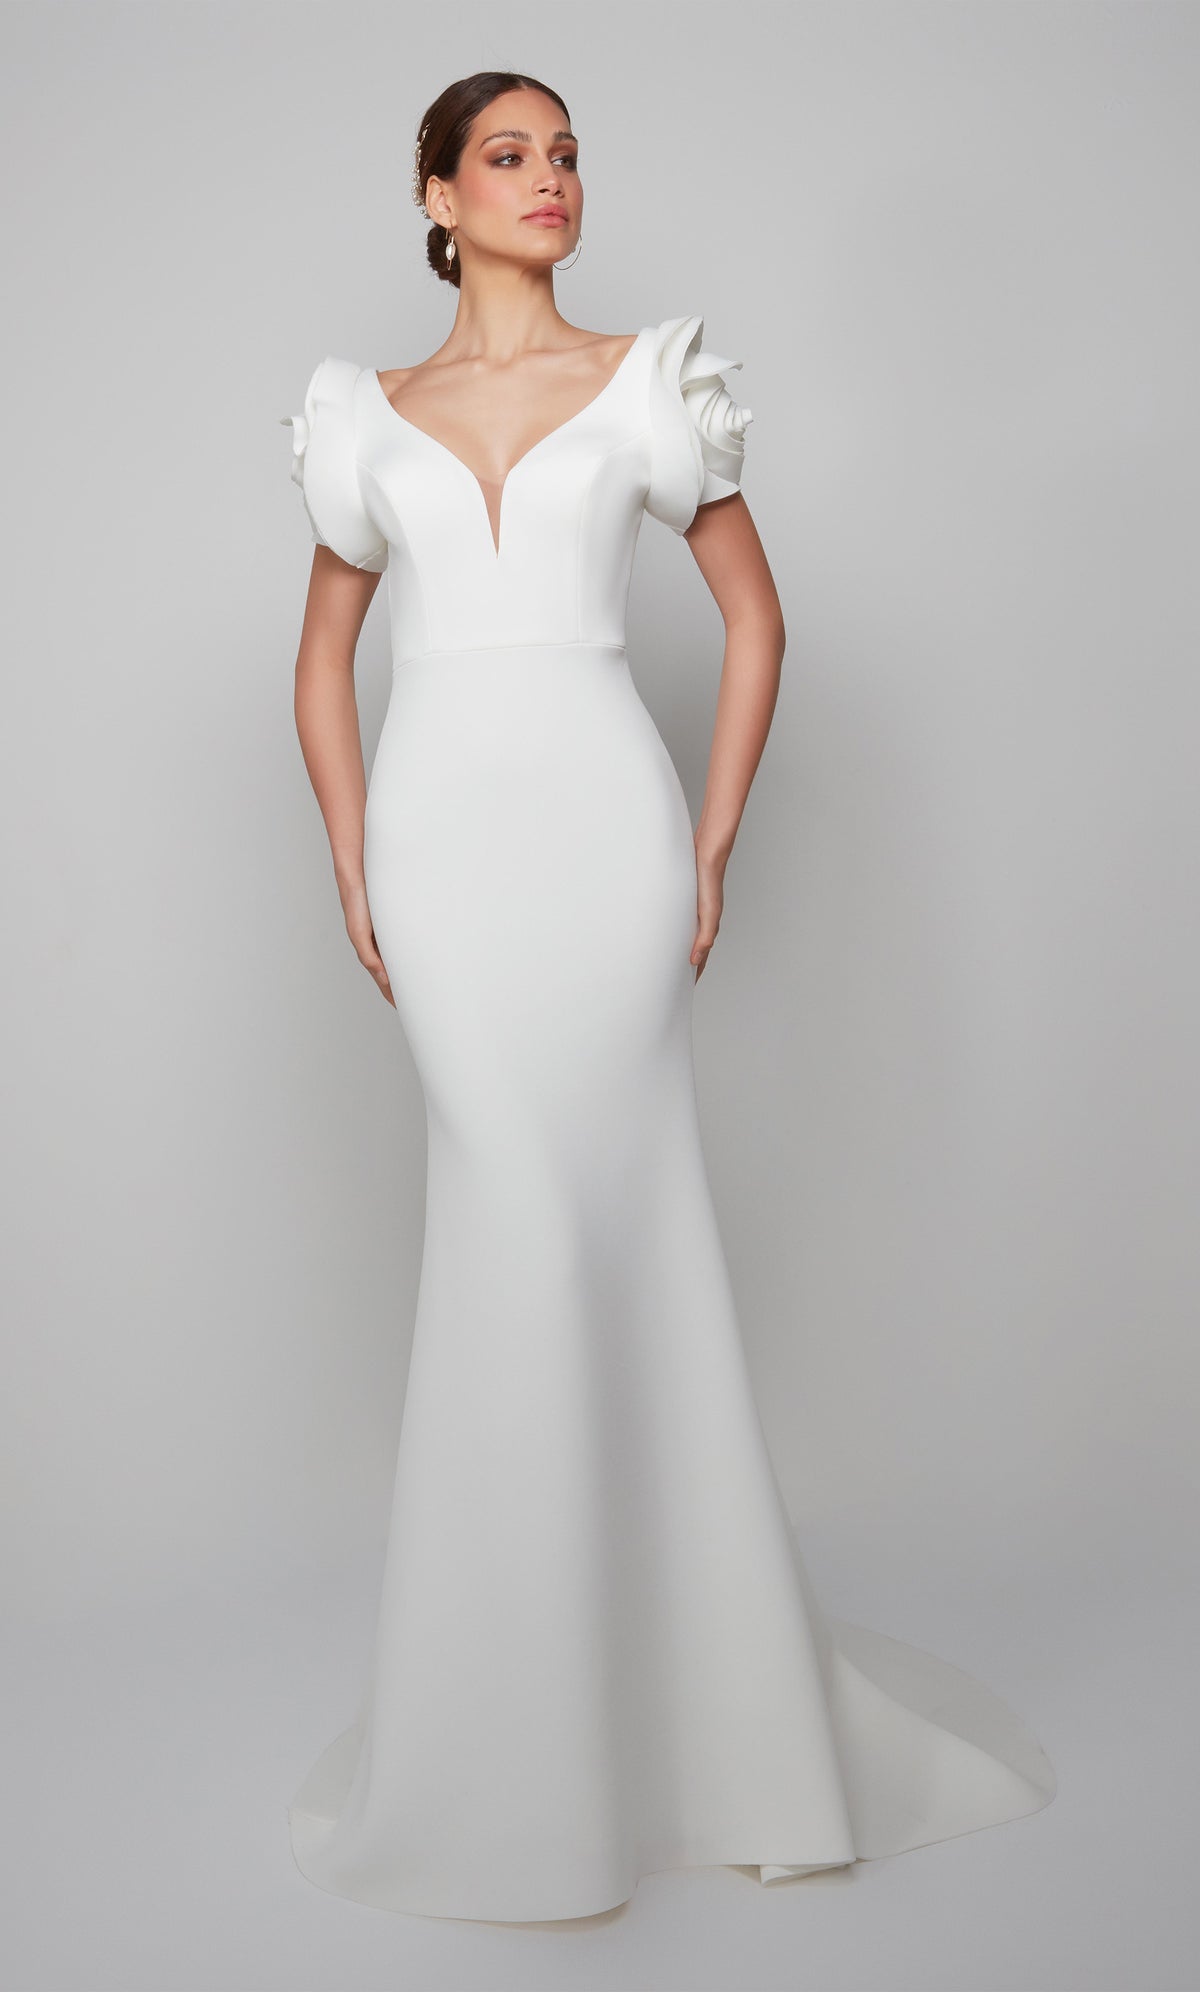 Ivory floral wedding dress with a plunging neckline and fit and flare silhouette.